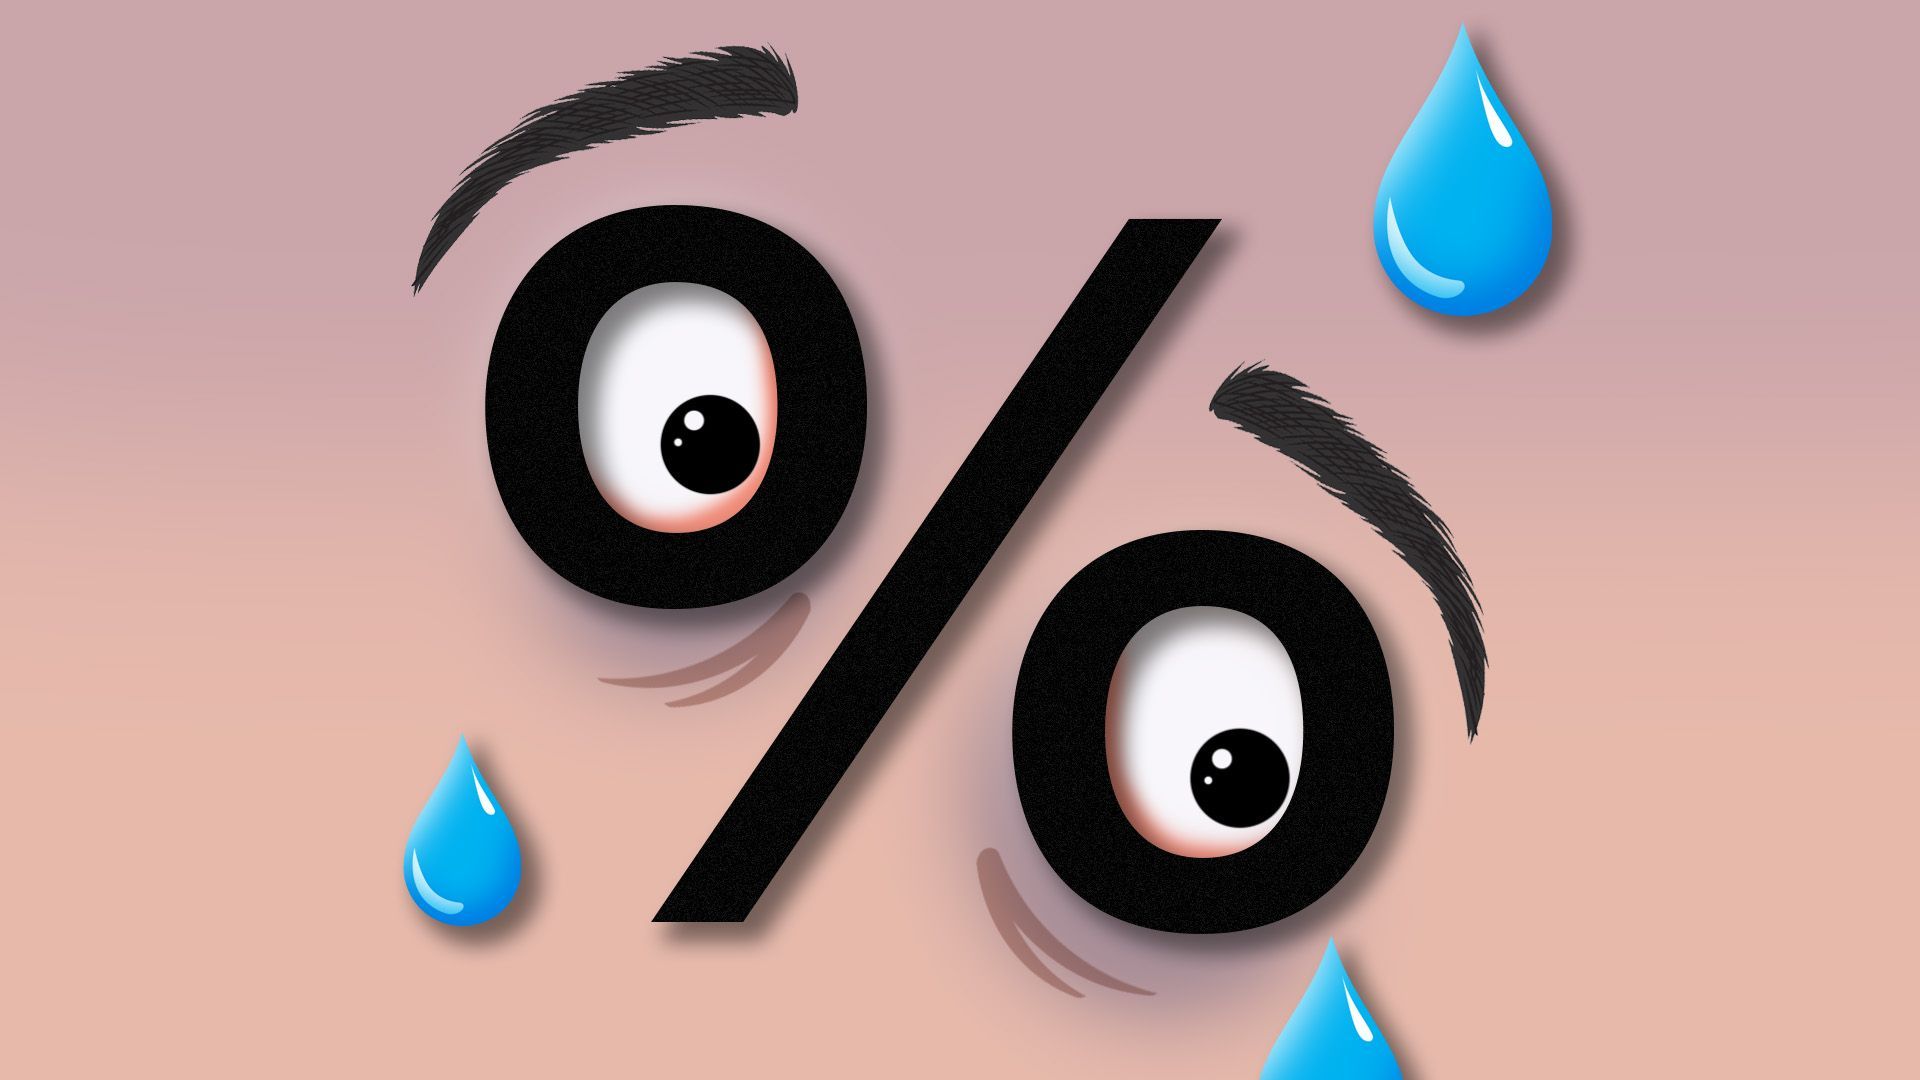 Illustration of a percent sign in the shape of a nervous-looking face with beads of sweat